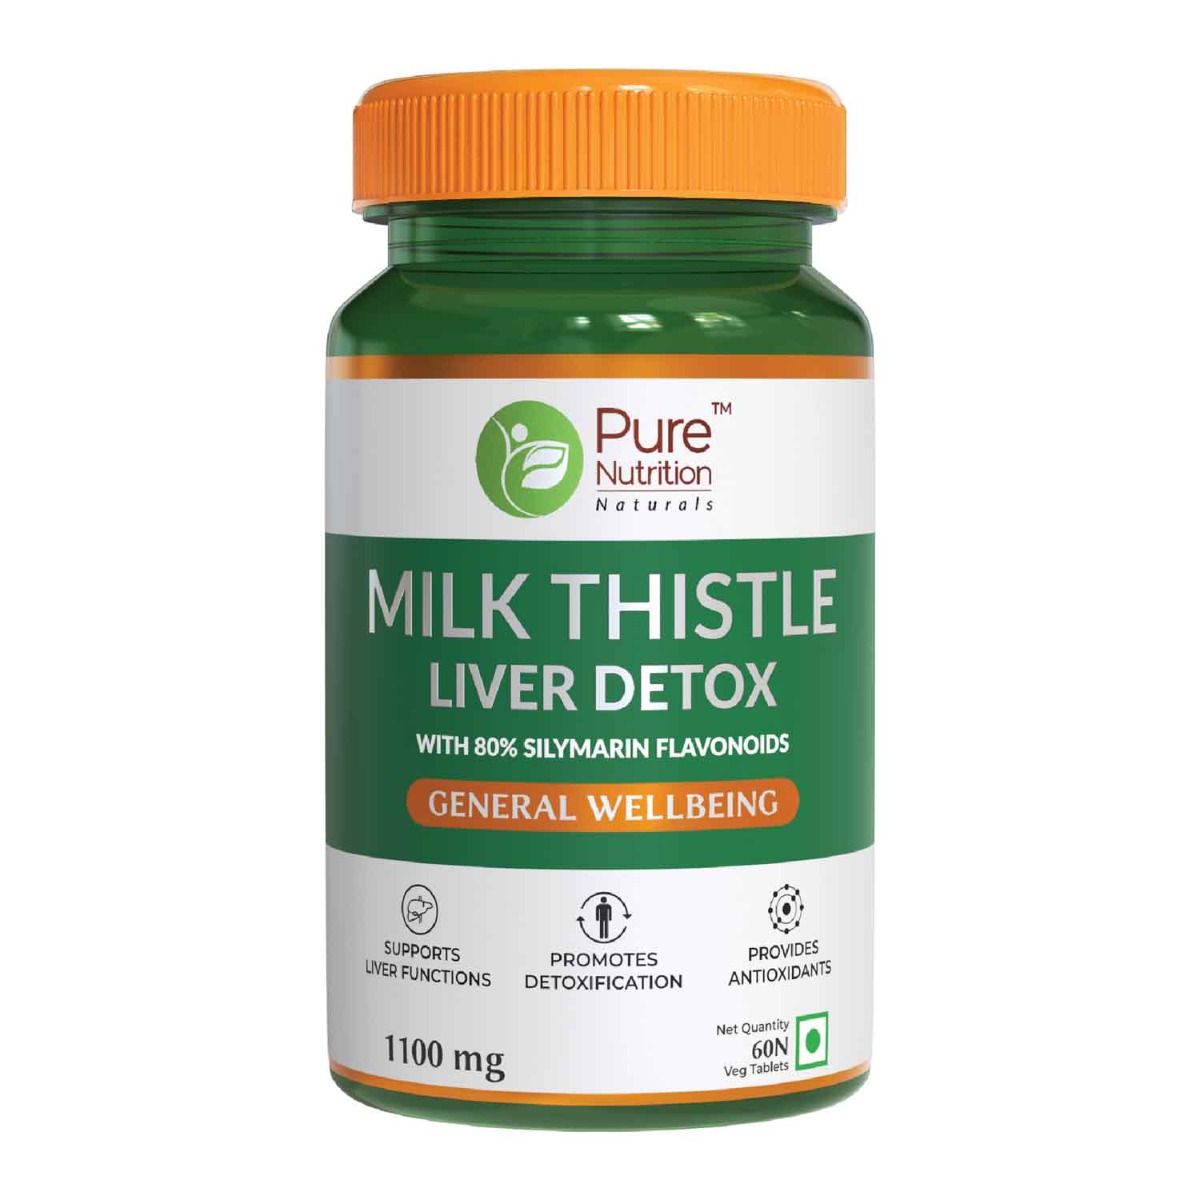 Pure Nutrition Milk Thistle Liver Detox, 60 Tablets, Pack of 1 